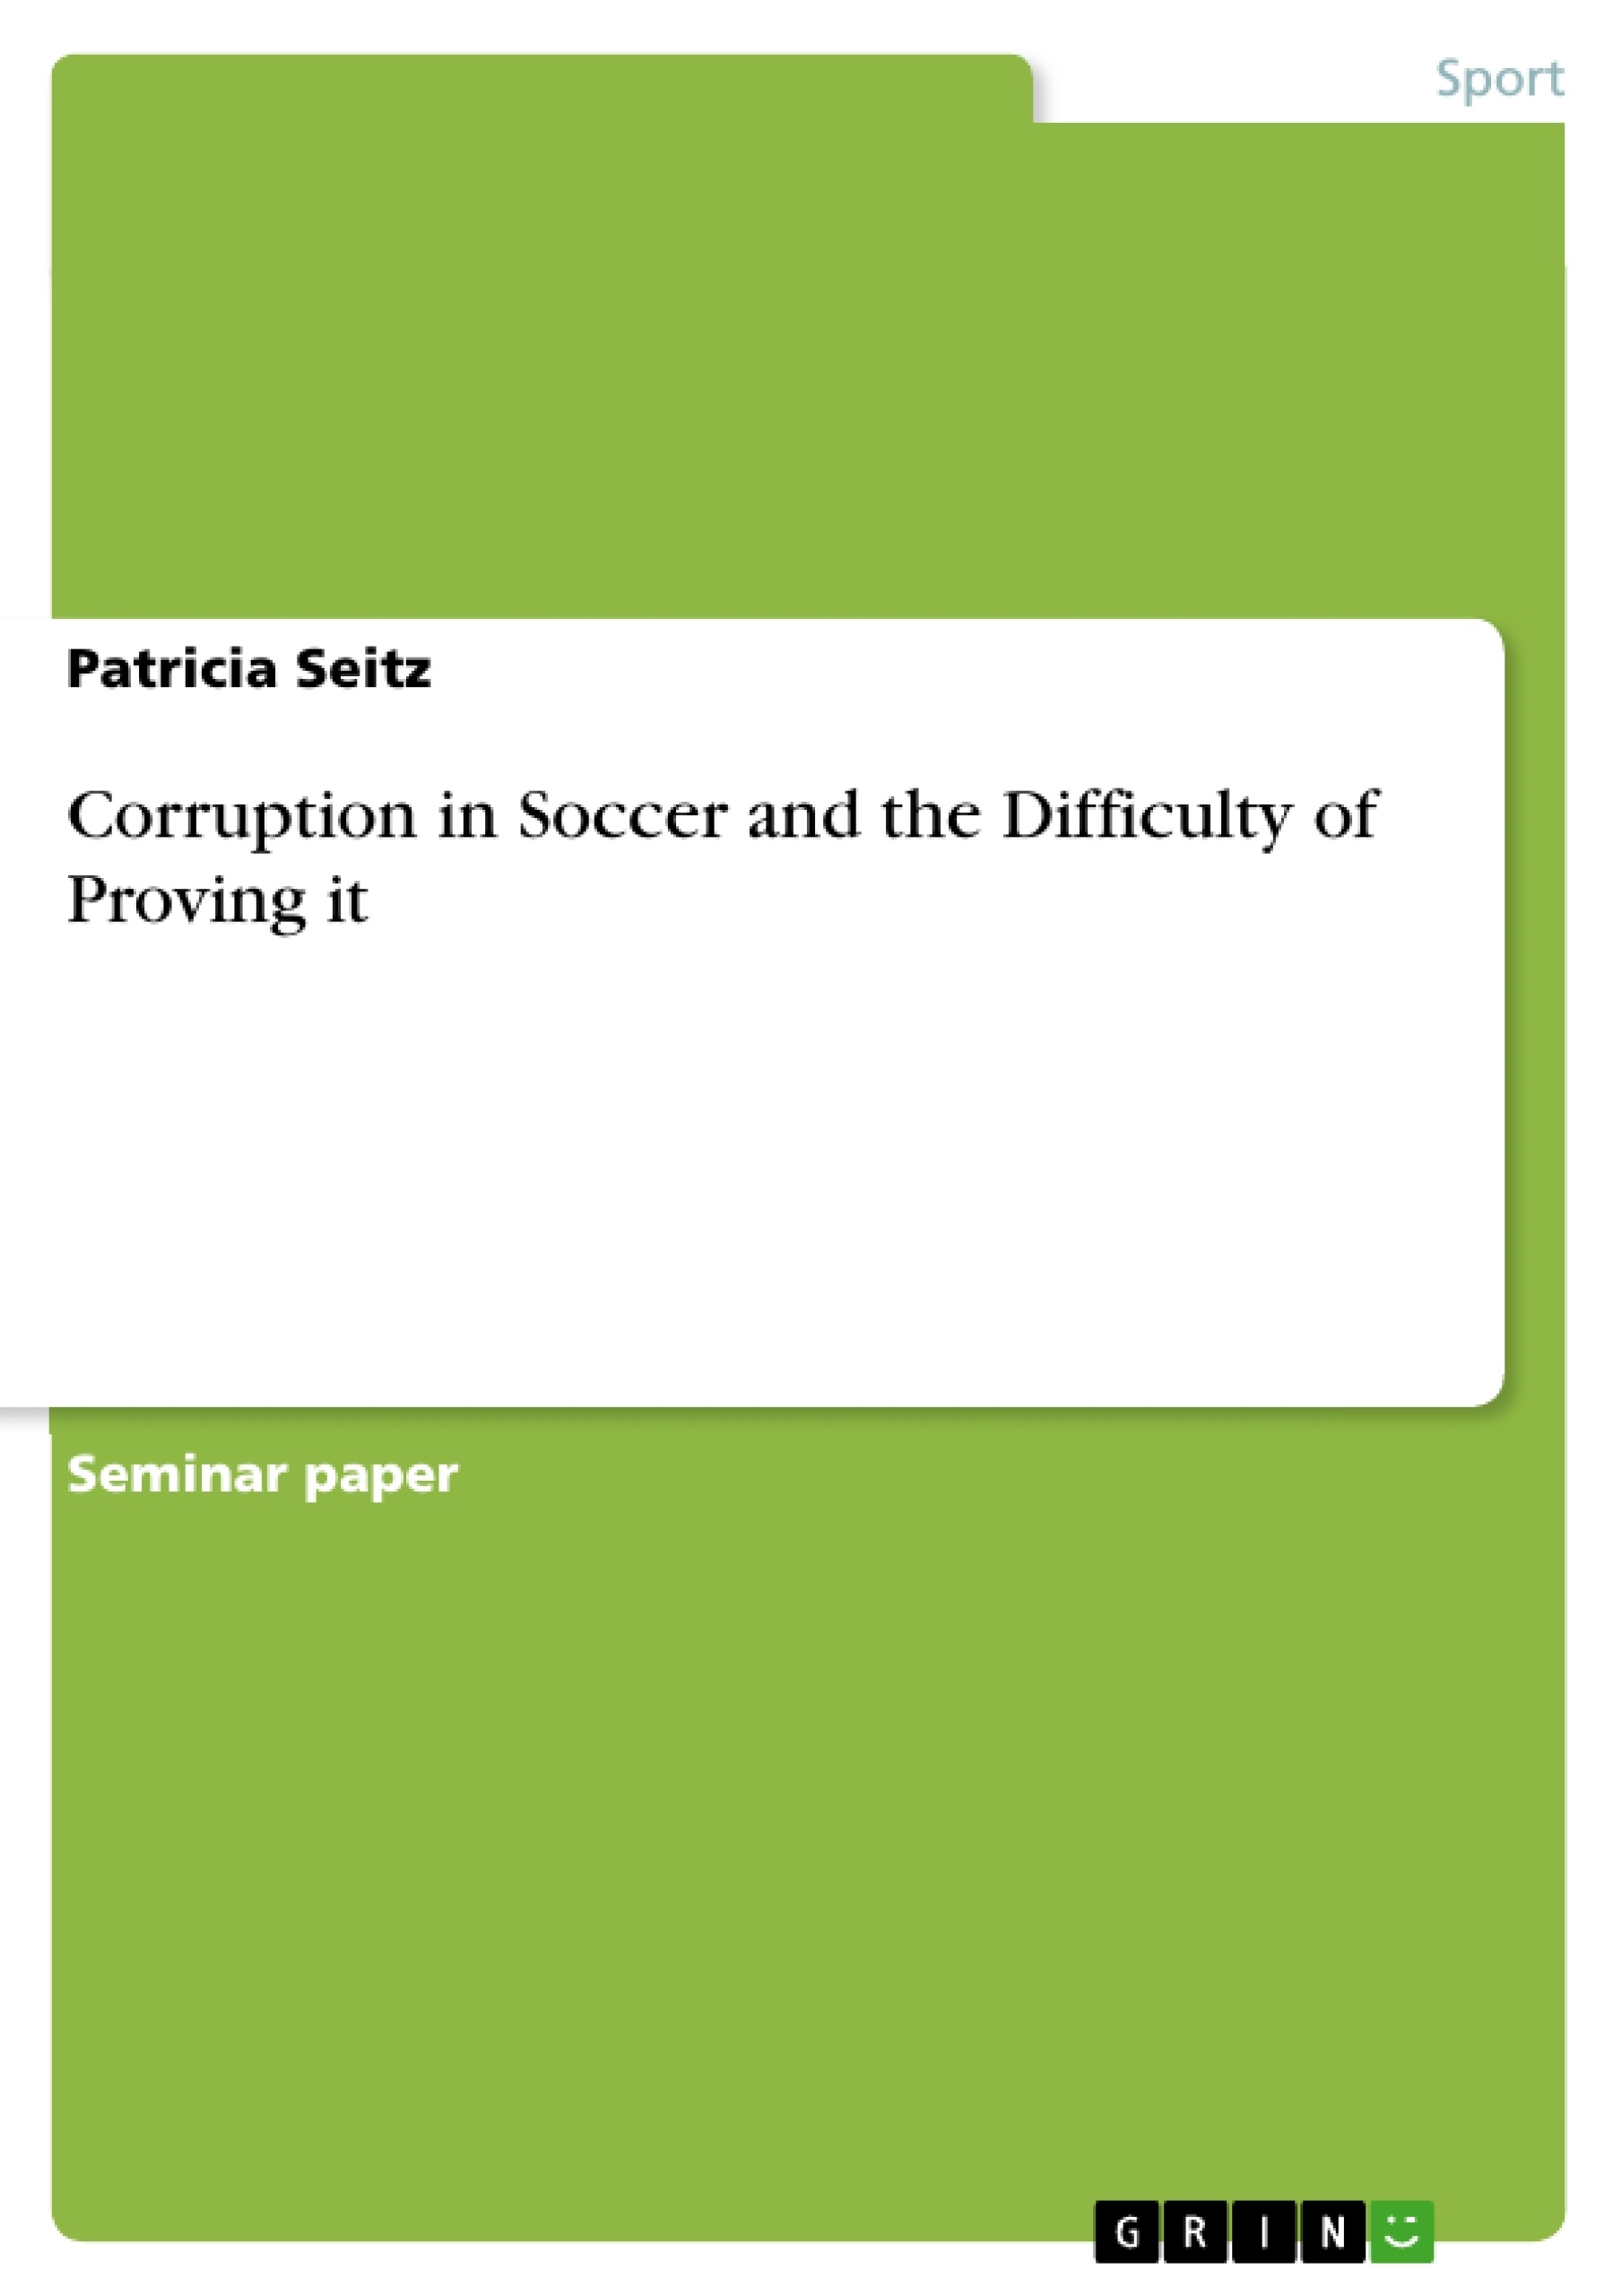 Title: Corruption in Soccer and the Difficulty of Proving it